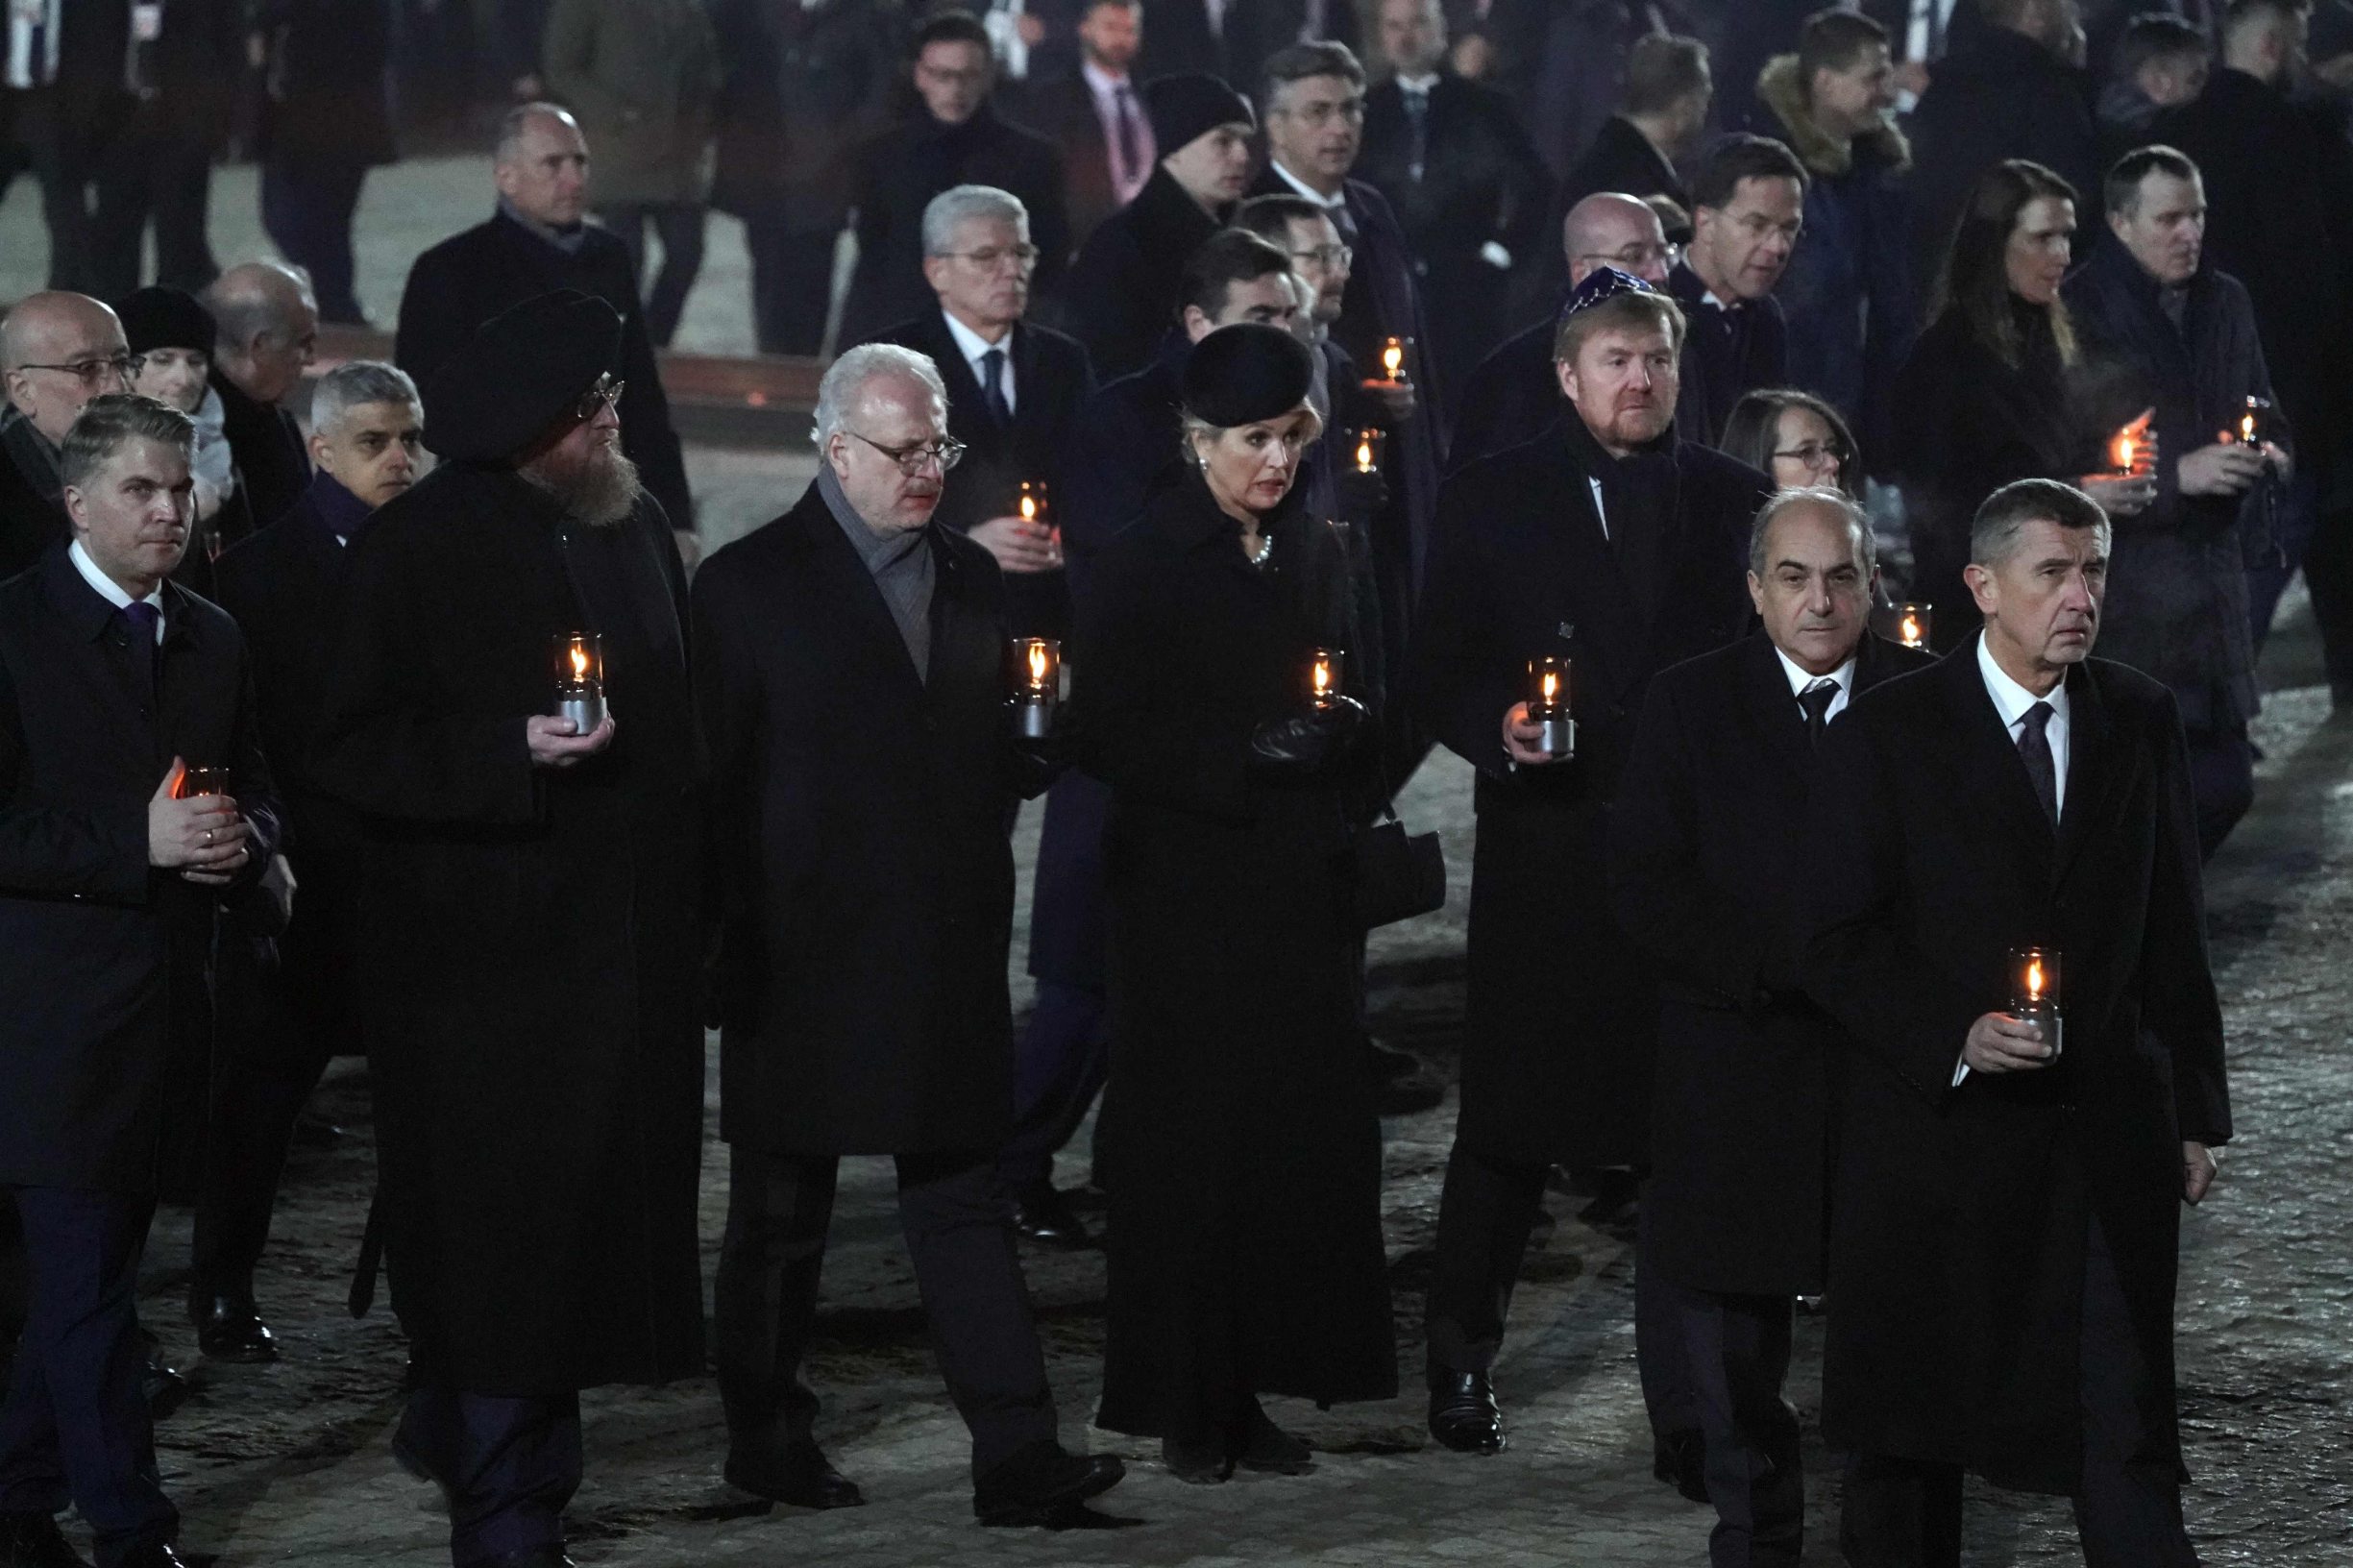 A deleagation of heads of state including Czech Prime Minister Andrej Babis (R) arrive for a candle lighting ceremony at the former German Nazi death camp Auschwitz-Birkenau during events to commemorate the 75th anniversary of the camp's liberation in Oswiecim, Poland, on January 27, 2020. - More than 200 survivors came from across the globe to the camp the Nazis built in Oswiecim in then-occupied Poland, to share their testimony as a stark warning amid a recent surge of anti-semitic attacks on both sides of the Atlantic. (Photo by Wojtek RADWANSKI / AFP)